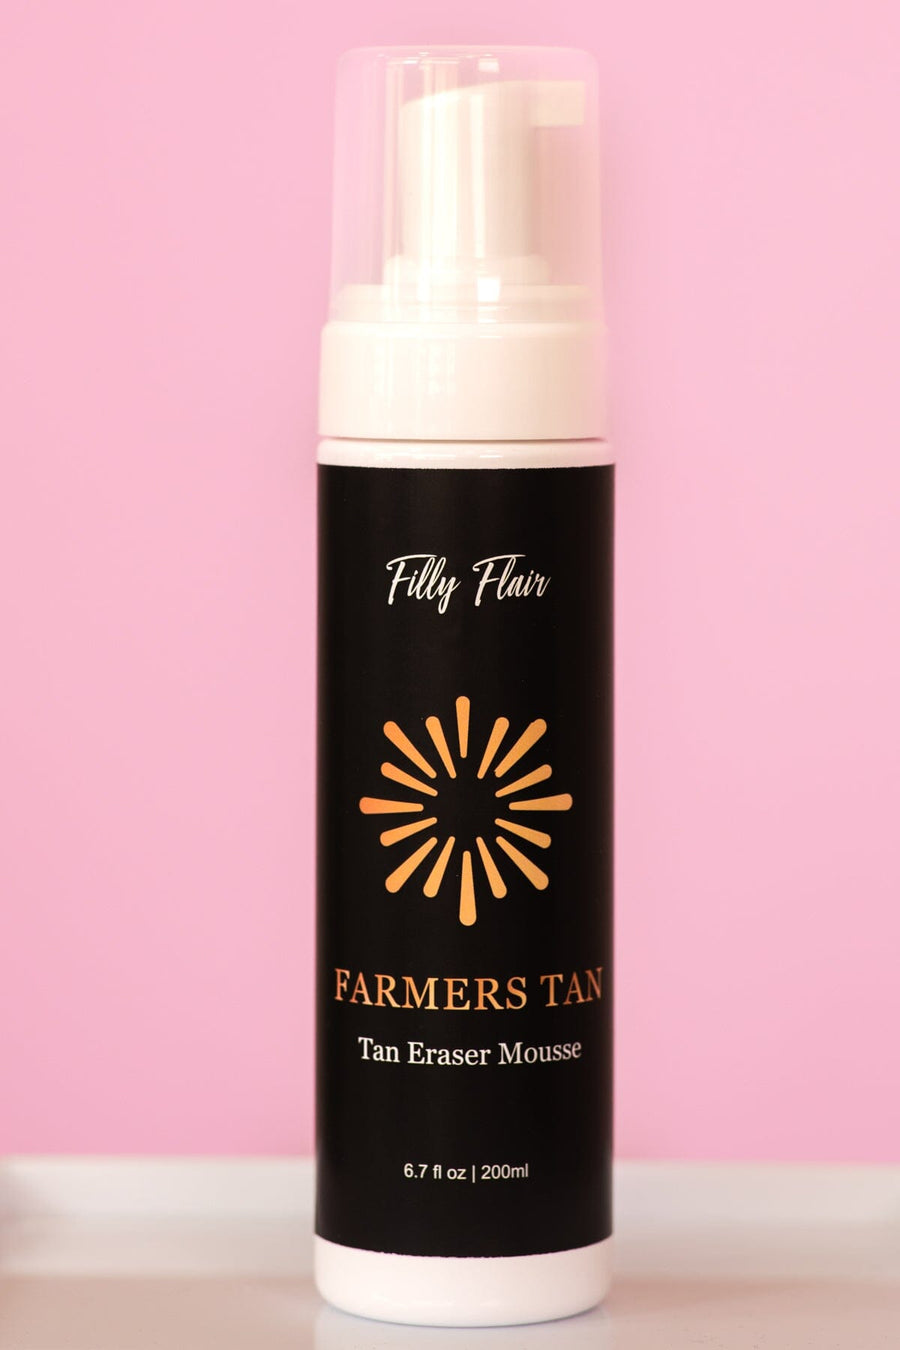 Farmers Tan Eraser Mousse by Filly Flair - Filly Flair